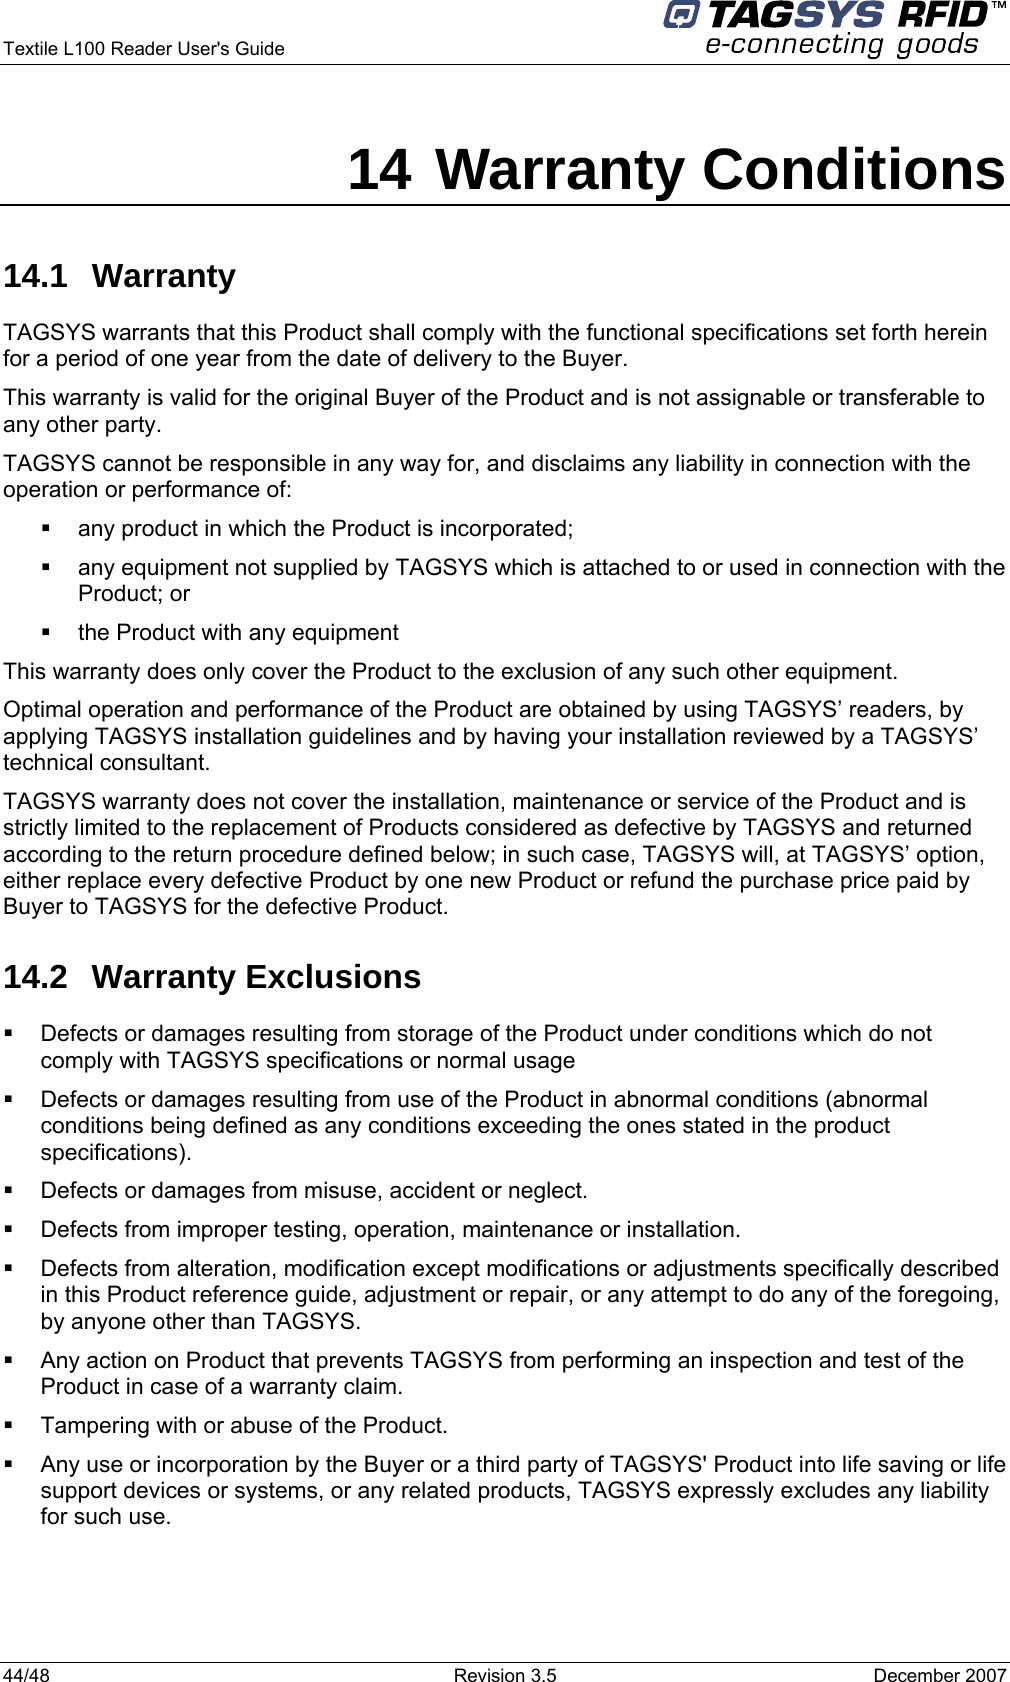  Textile L100 Reader User&apos;s Guide     44/48  Revision 3.5  December 2007 14 Warranty Conditions 14.1 Warranty TAGSYS warrants that this Product shall comply with the functional specifications set forth herein for a period of one year from the date of delivery to the Buyer. This warranty is valid for the original Buyer of the Product and is not assignable or transferable to any other party. TAGSYS cannot be responsible in any way for, and disclaims any liability in connection with the operation or performance of:   any product in which the Product is incorporated;   any equipment not supplied by TAGSYS which is attached to or used in connection with the Product; or   the Product with any equipment This warranty does only cover the Product to the exclusion of any such other equipment. Optimal operation and performance of the Product are obtained by using TAGSYS’ readers, by applying TAGSYS installation guidelines and by having your installation reviewed by a TAGSYS’ technical consultant. TAGSYS warranty does not cover the installation, maintenance or service of the Product and is strictly limited to the replacement of Products considered as defective by TAGSYS and returned according to the return procedure defined below; in such case, TAGSYS will, at TAGSYS’ option, either replace every defective Product by one new Product or refund the purchase price paid by Buyer to TAGSYS for the defective Product. 14.2 Warranty Exclusions   Defects or damages resulting from storage of the Product under conditions which do not comply with TAGSYS specifications or normal usage   Defects or damages resulting from use of the Product in abnormal conditions (abnormal conditions being defined as any conditions exceeding the ones stated in the product specifications).   Defects or damages from misuse, accident or neglect.   Defects from improper testing, operation, maintenance or installation.   Defects from alteration, modification except modifications or adjustments specifically described in this Product reference guide, adjustment or repair, or any attempt to do any of the foregoing, by anyone other than TAGSYS.   Any action on Product that prevents TAGSYS from performing an inspection and test of the Product in case of a warranty claim.   Tampering with or abuse of the Product.   Any use or incorporation by the Buyer or a third party of TAGSYS&apos; Product into life saving or life support devices or systems, or any related products, TAGSYS expressly excludes any liability for such use. 